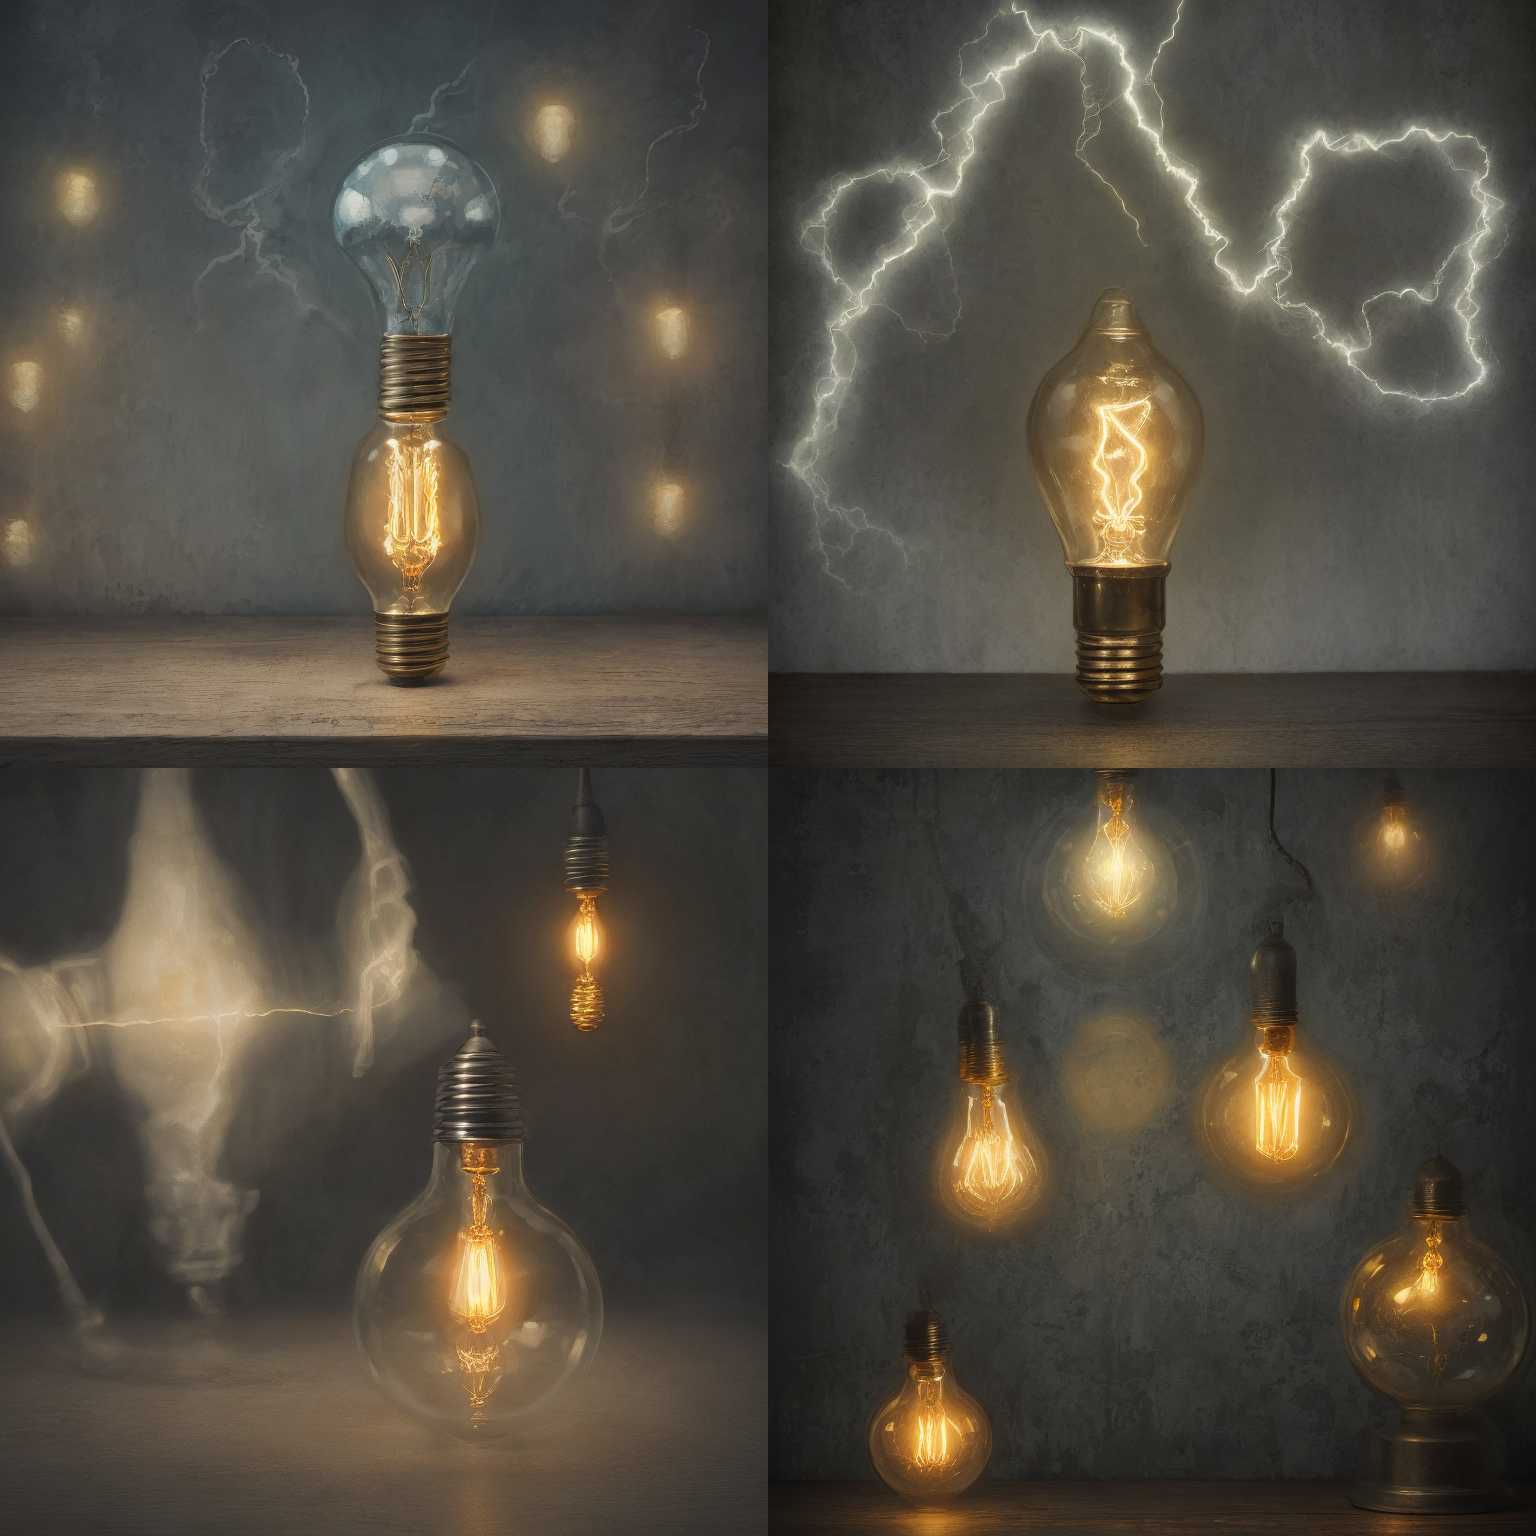 A lightbulb with electricity